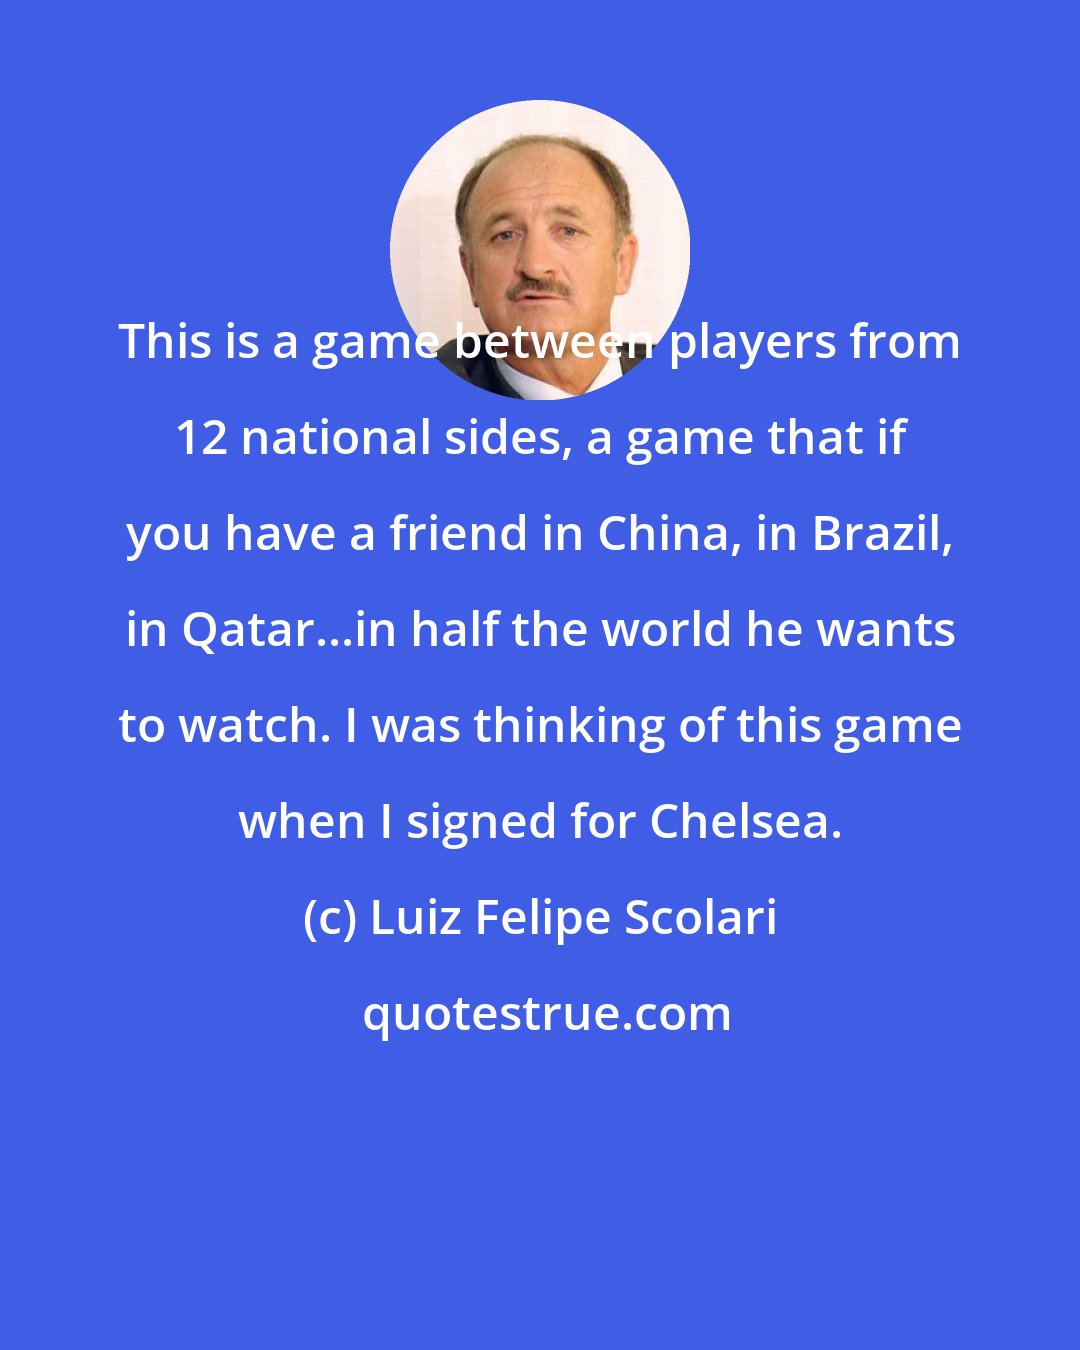 Luiz Felipe Scolari: This is a game between players from 12 national sides, a game that if you have a friend in China, in Brazil, in Qatar...in half the world he wants to watch. I was thinking of this game when I signed for Chelsea.